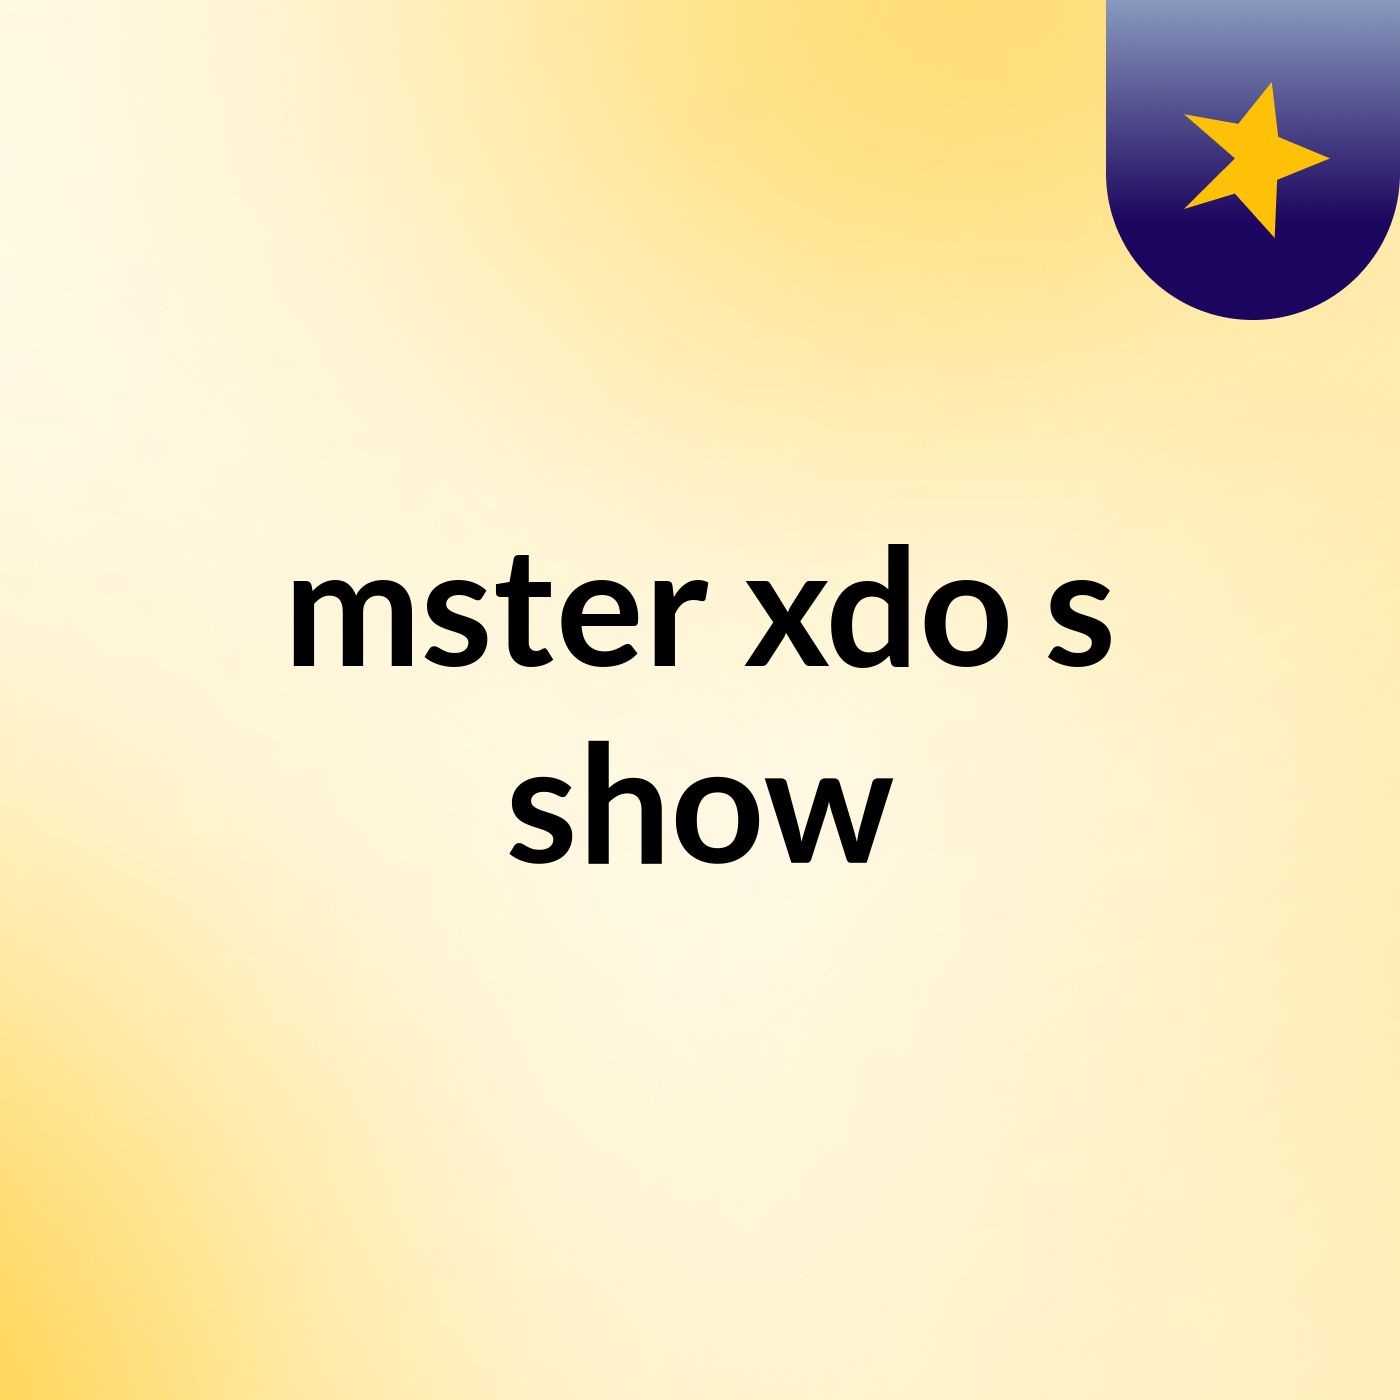 mster xdo's show